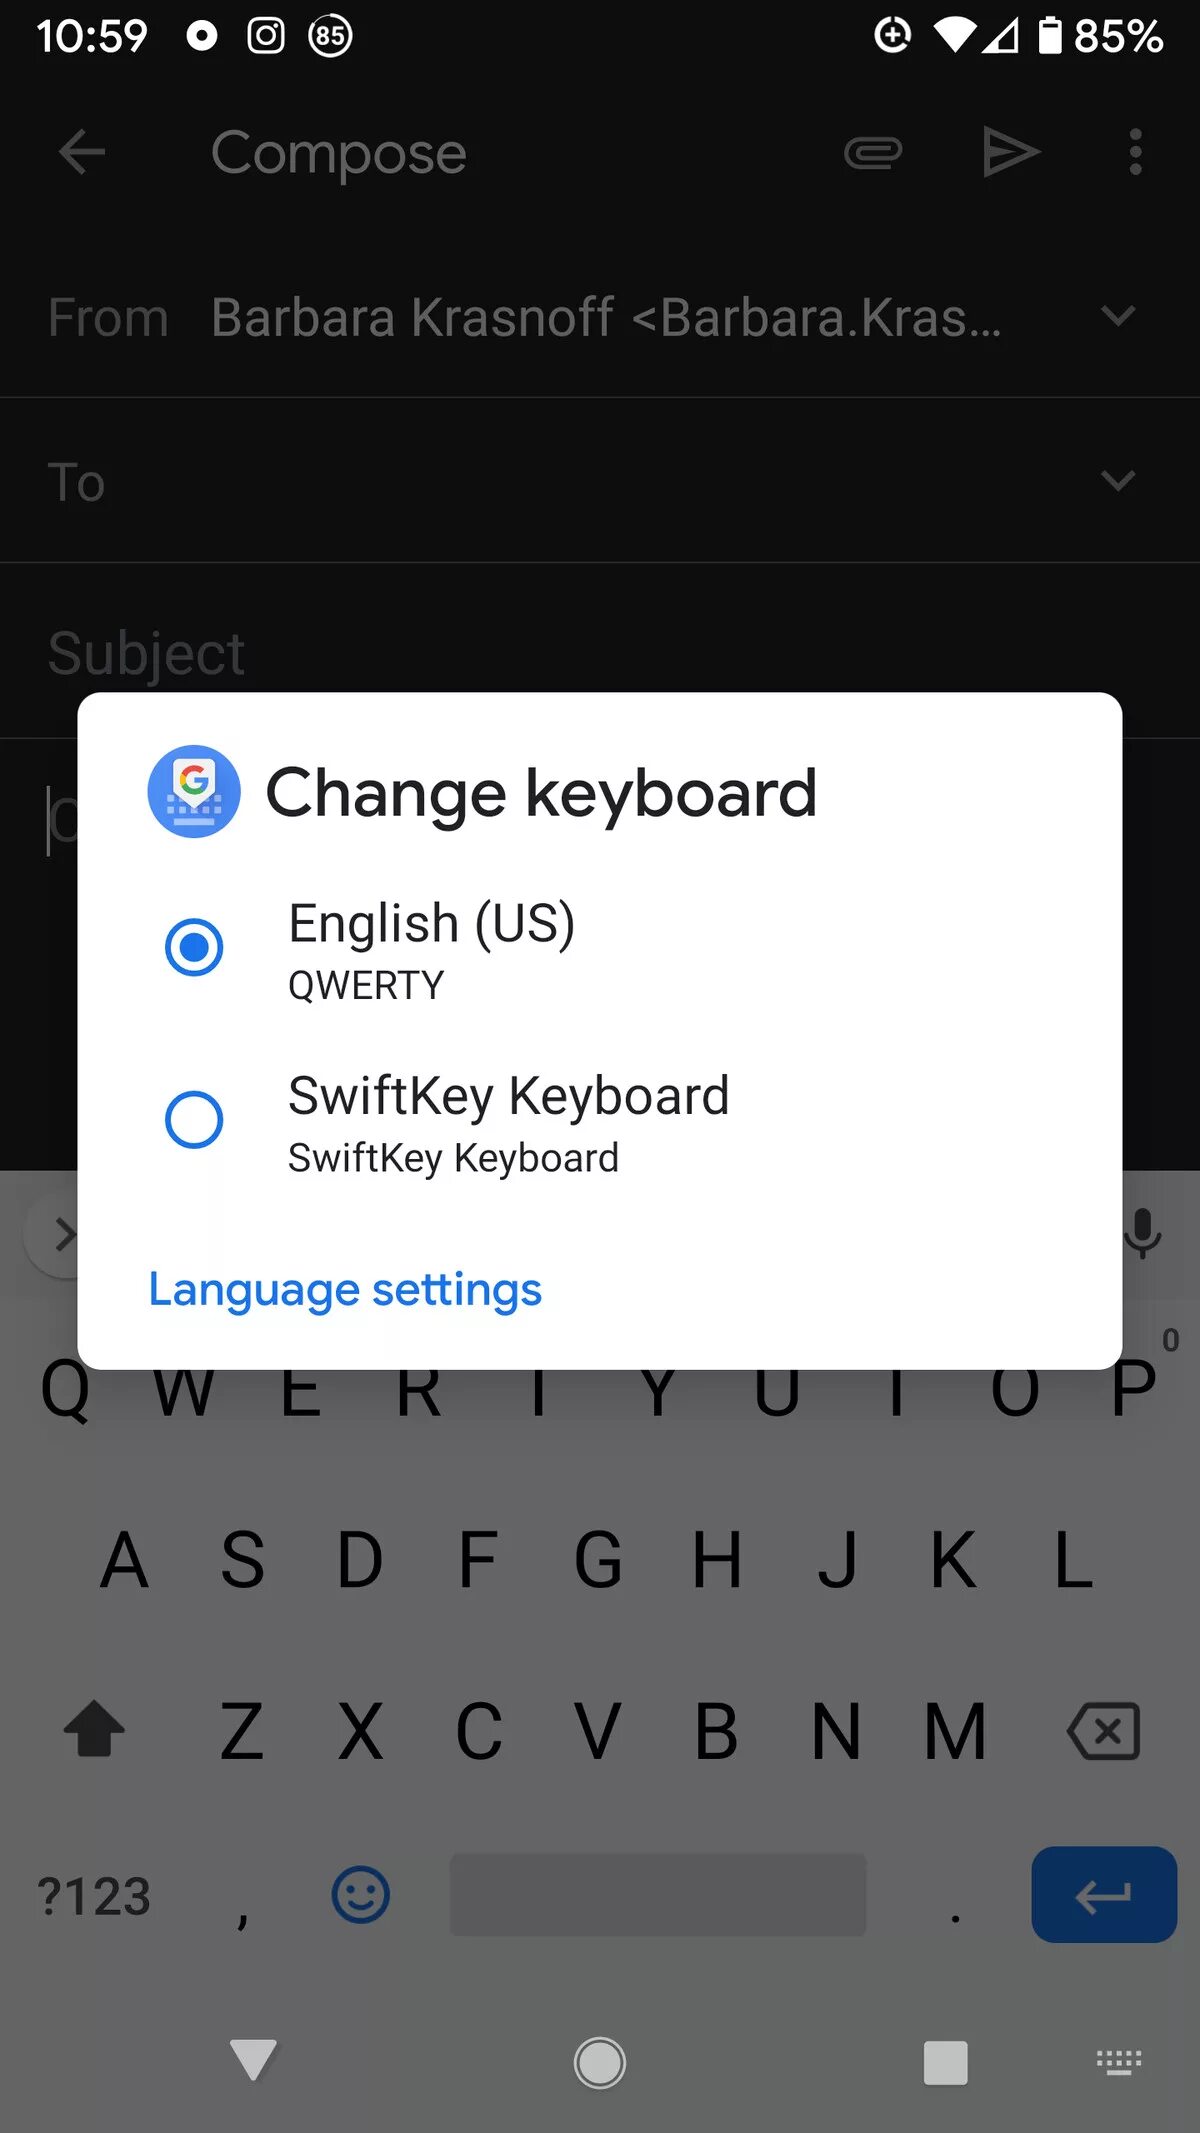 How to change language on Keyboard. Quick Switch Keyboard Android. Знак Тойоты и переключение языка на клавиатуре андроид. Переключение клавиатуры на андроиде